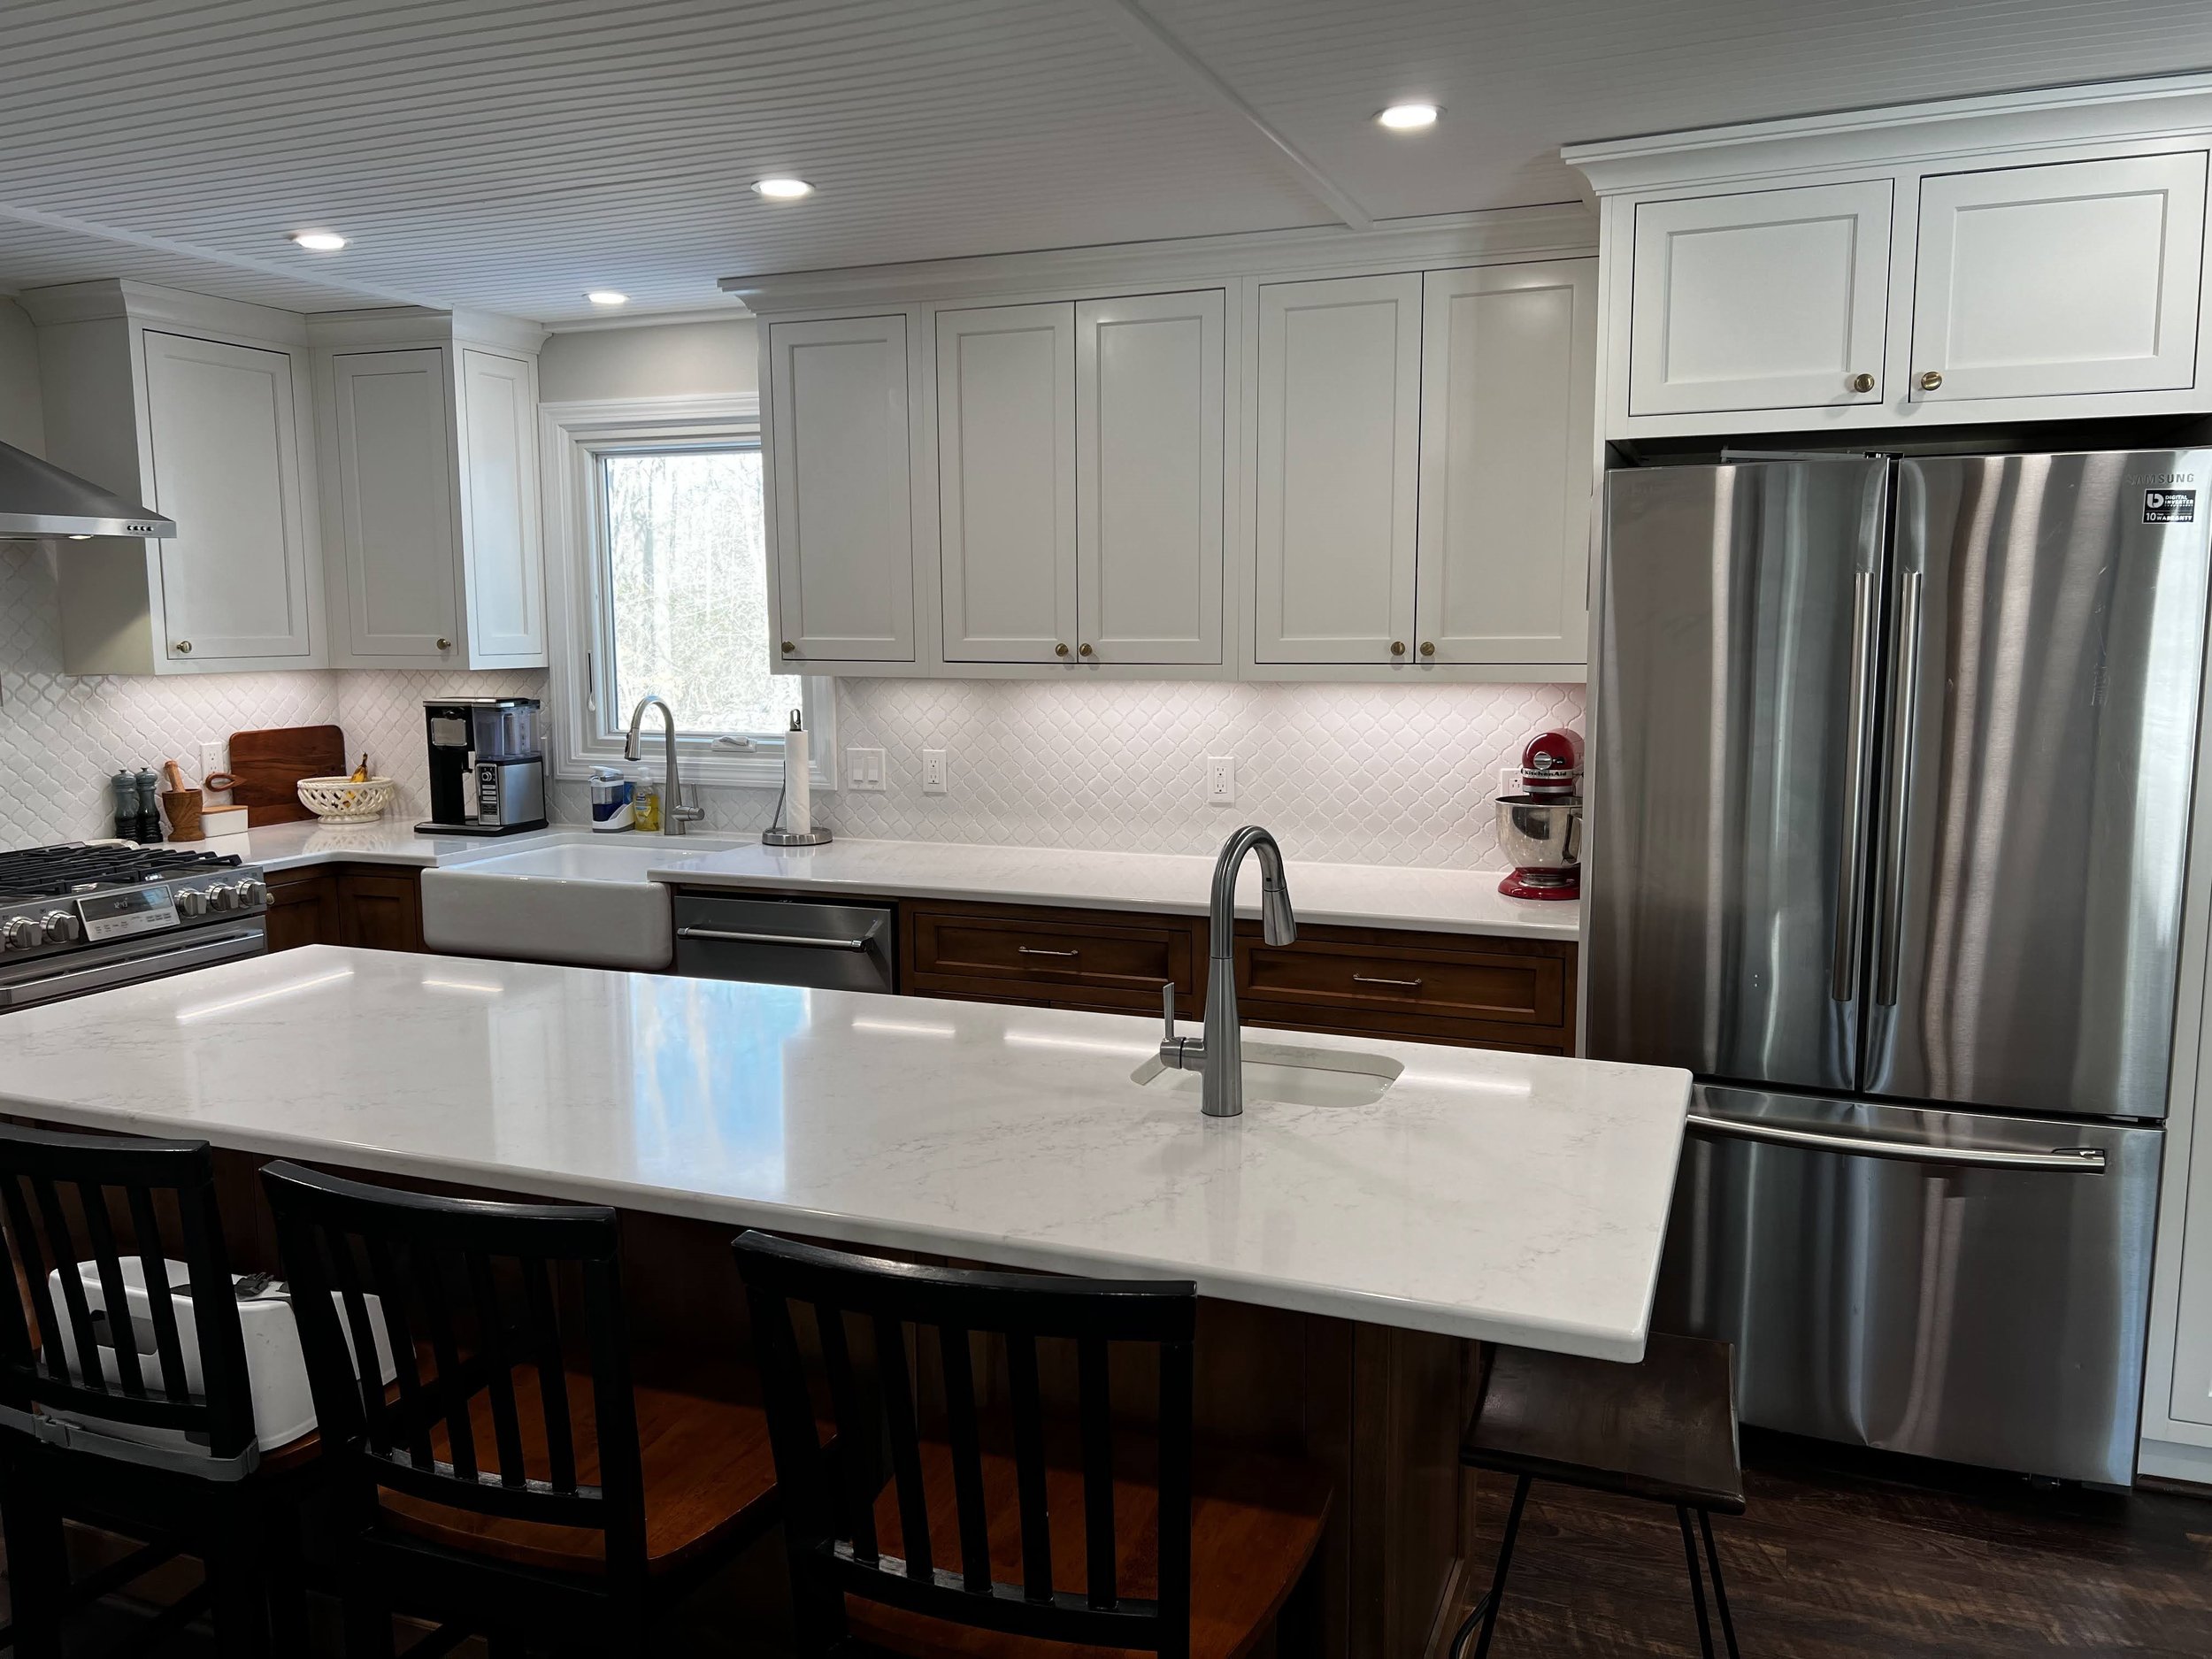 Shaw Remodeling - kitchen design renovations in Niantic East Lyme Old Lyme CT before and after photos makeover (13).jpg